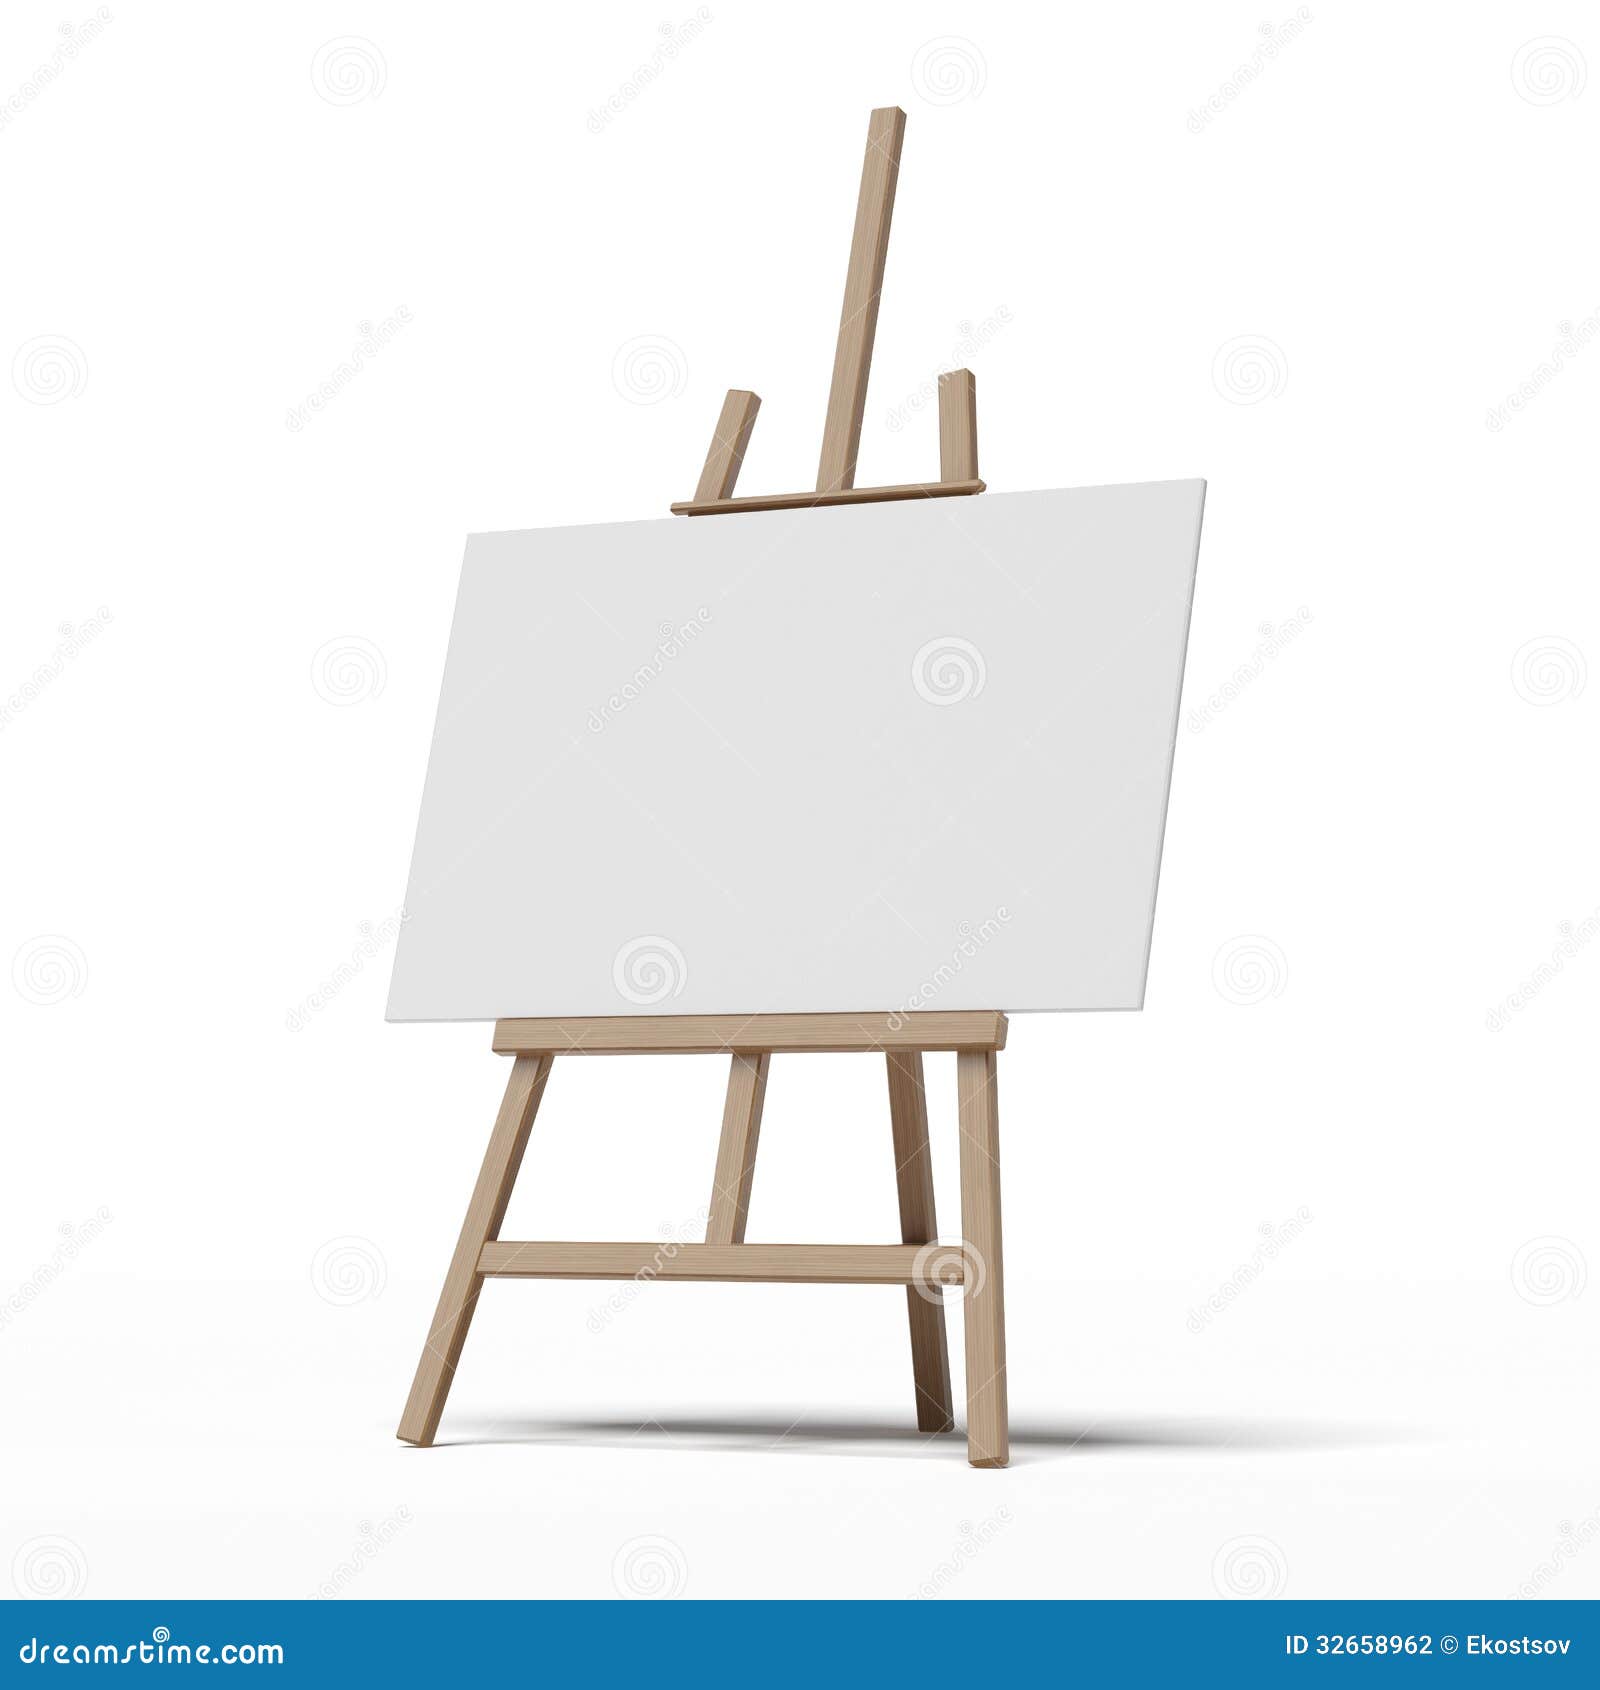 Easel With Empty Canvas Stock Photography - Image: 32658962